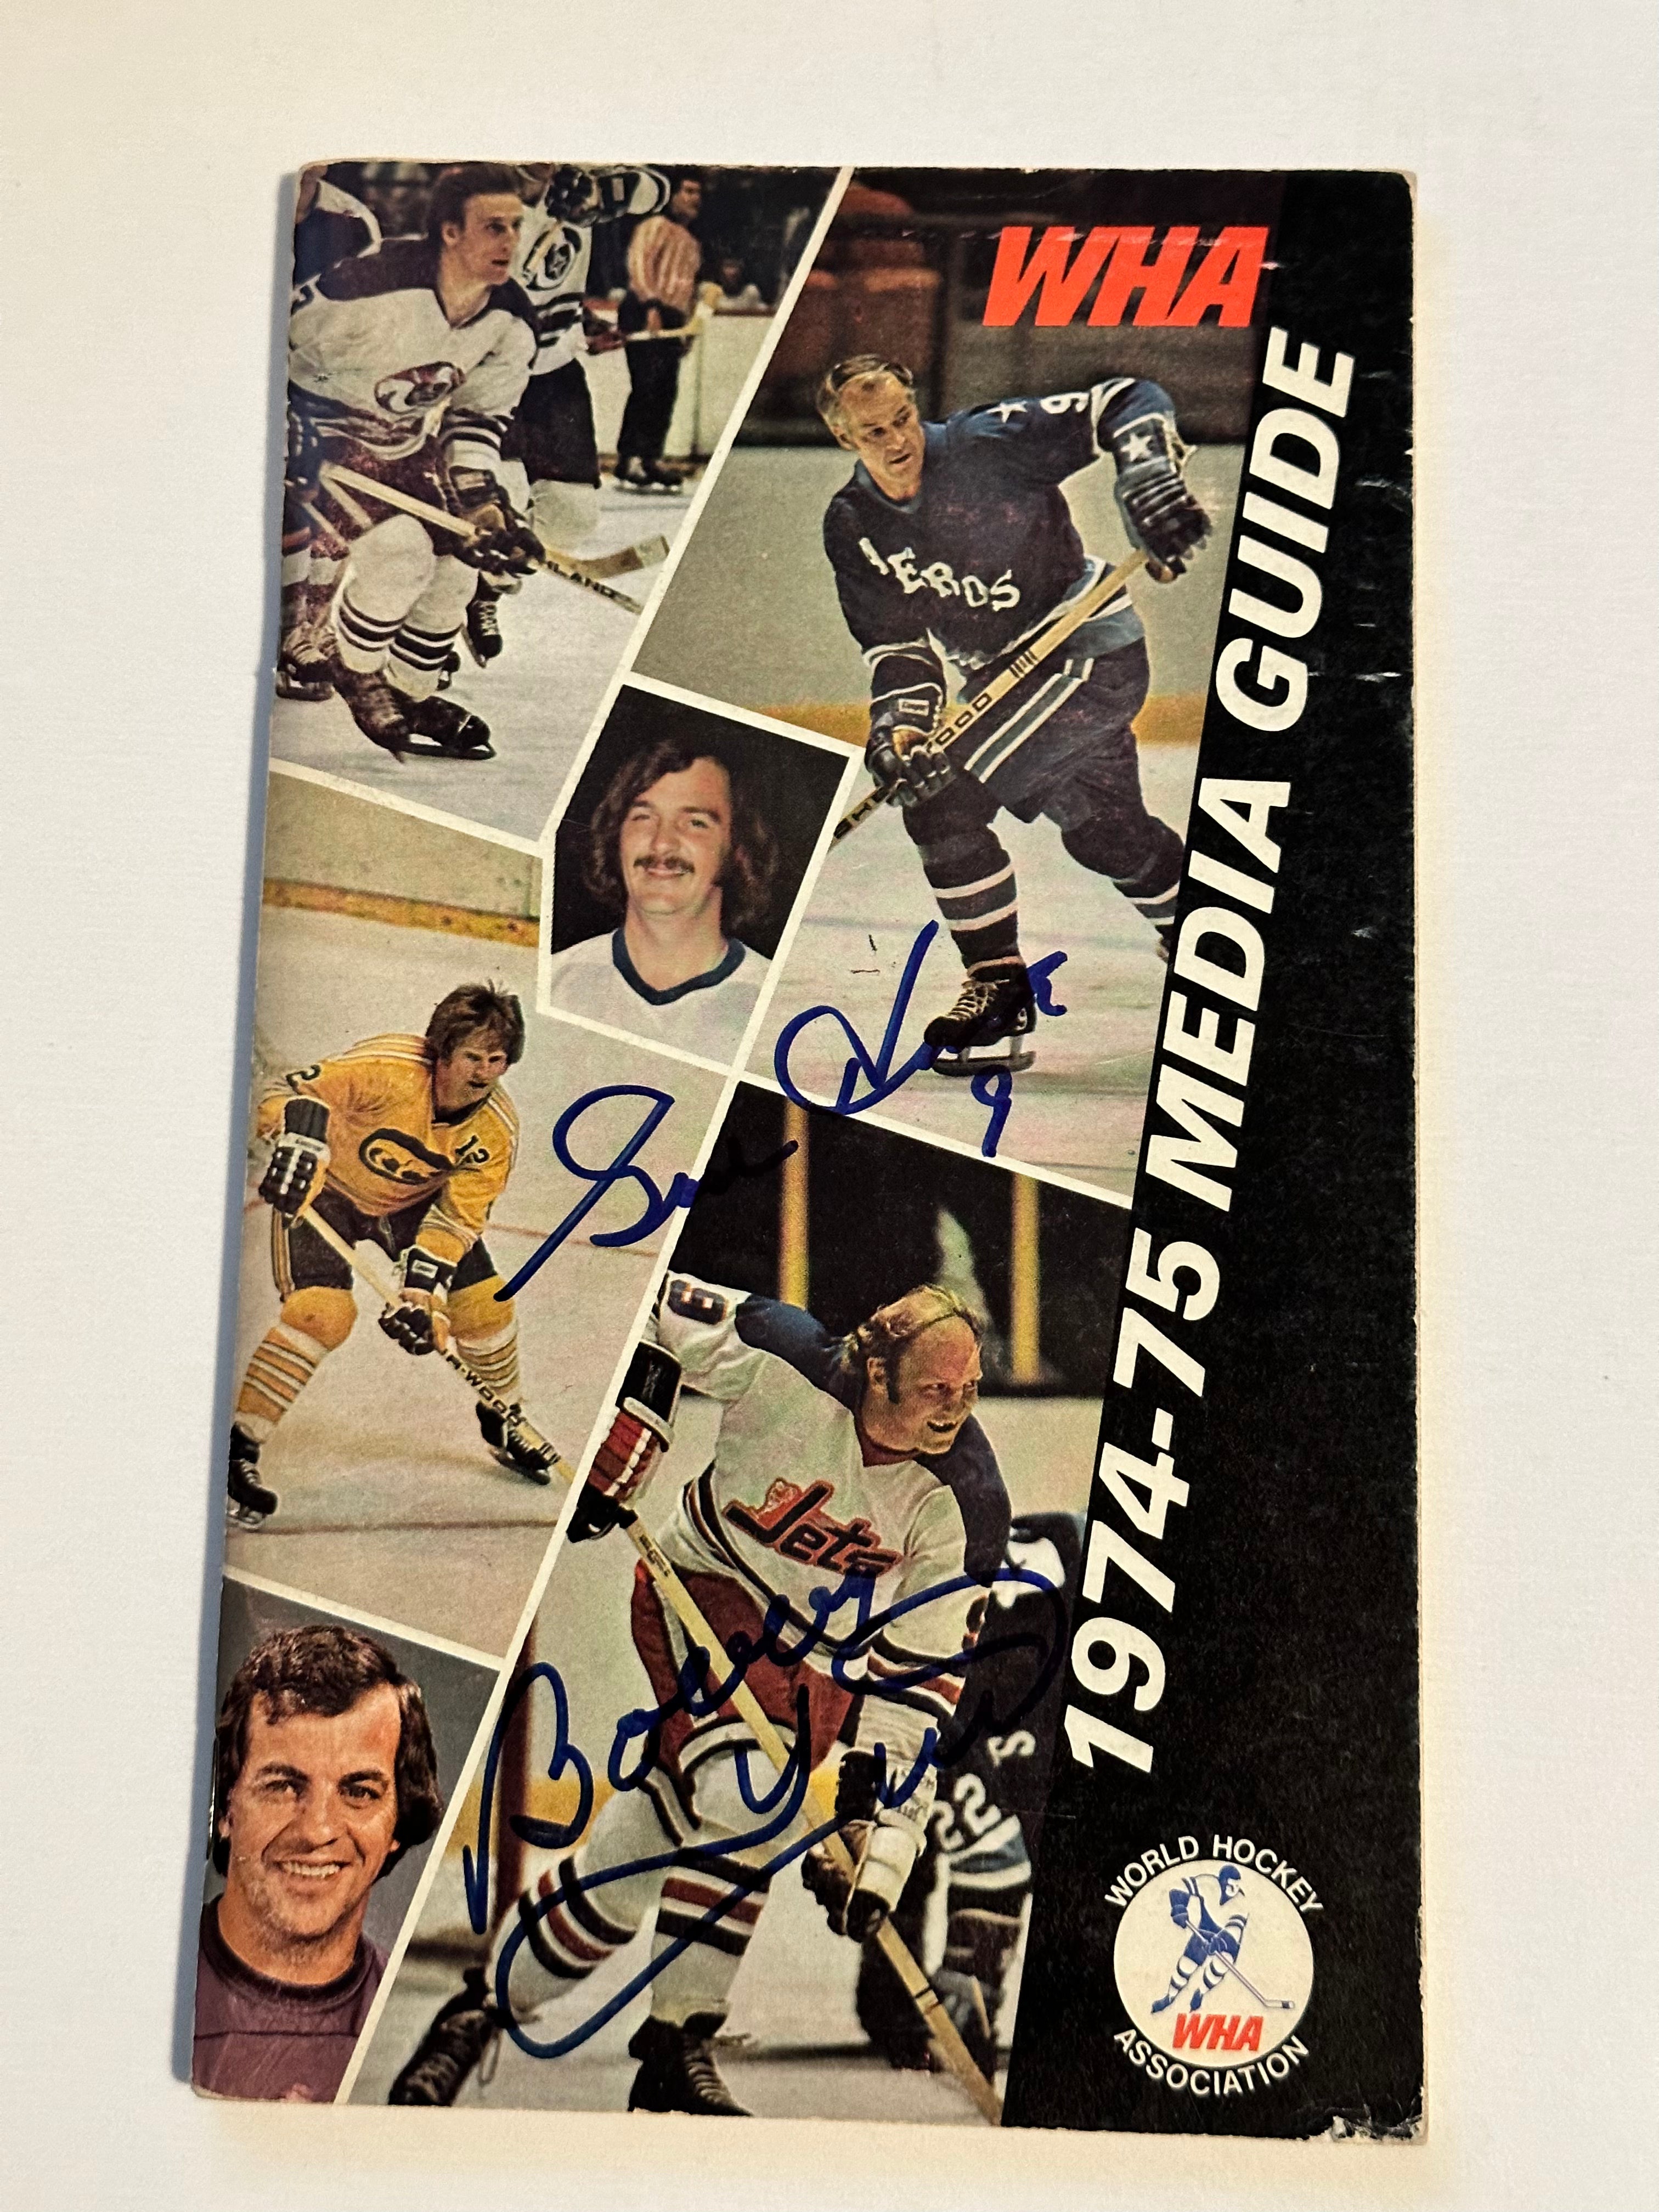 Bobby Hull and Gordie Howe WHA hockey autographed media guide with COA